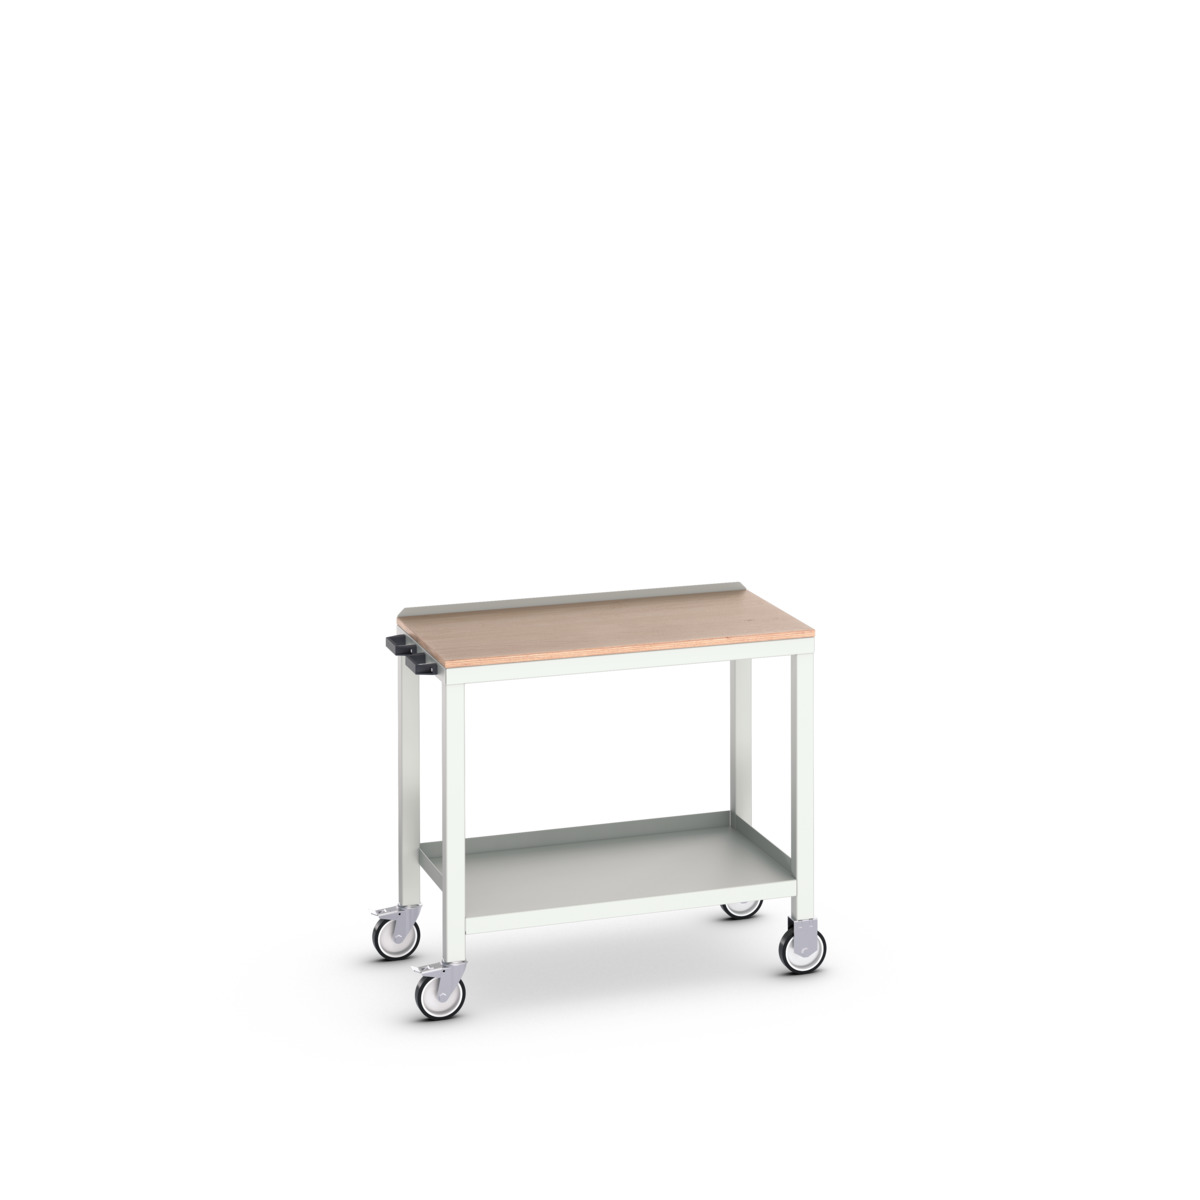 16922701.16 - verso mobile welded bench